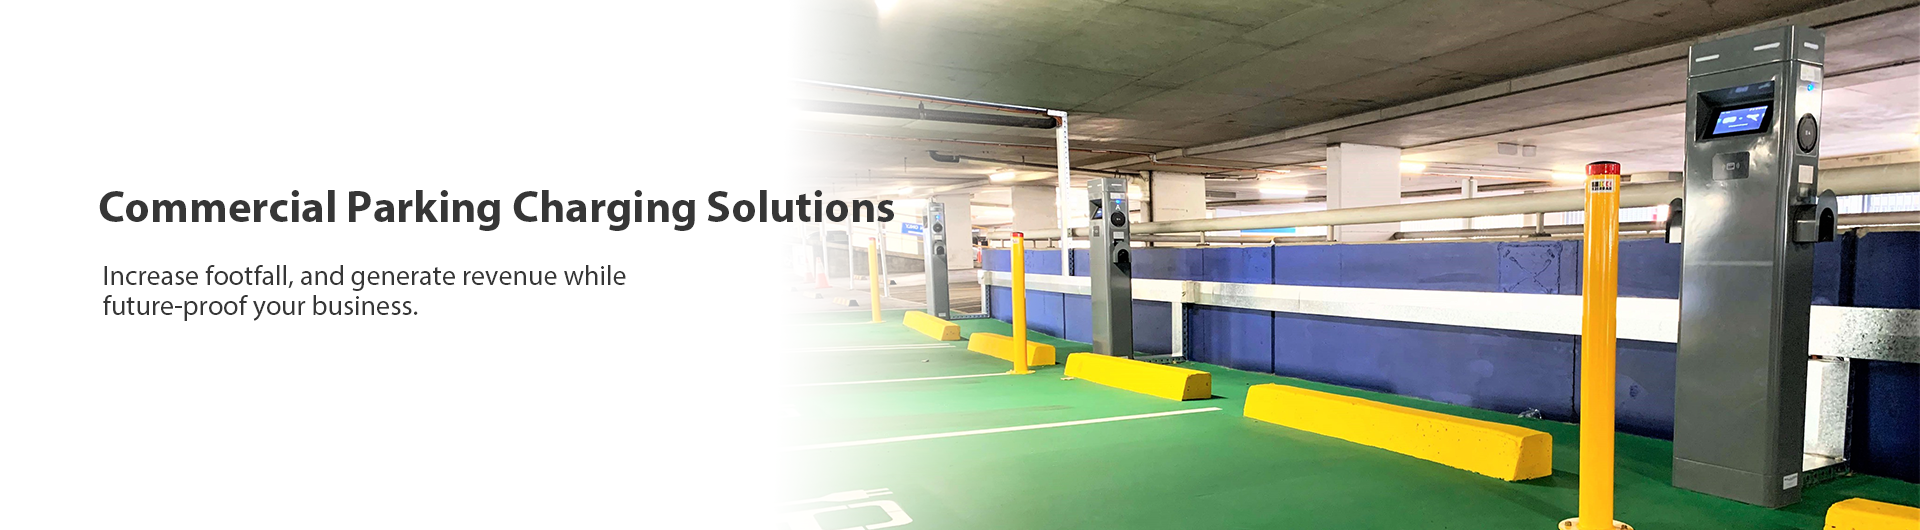 commercial charging parking solutions